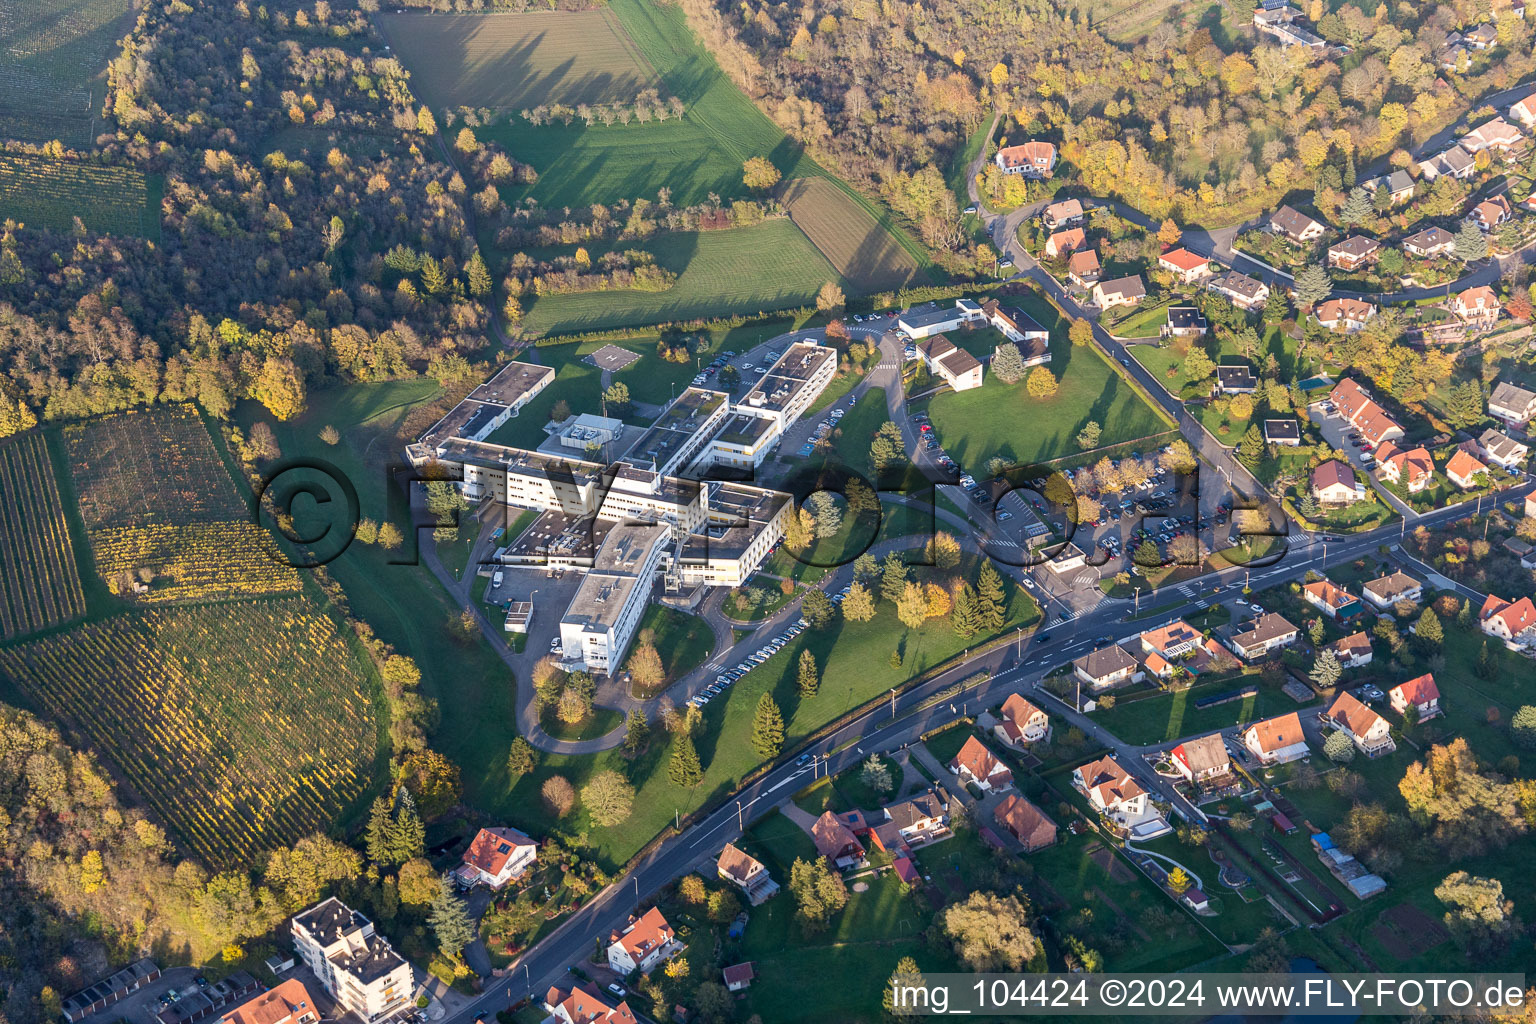 Aerial photograpy of Hospital grounds of the Clinic Centre Hospitalier de la Lauter in Wissembourg in Grand Est, France